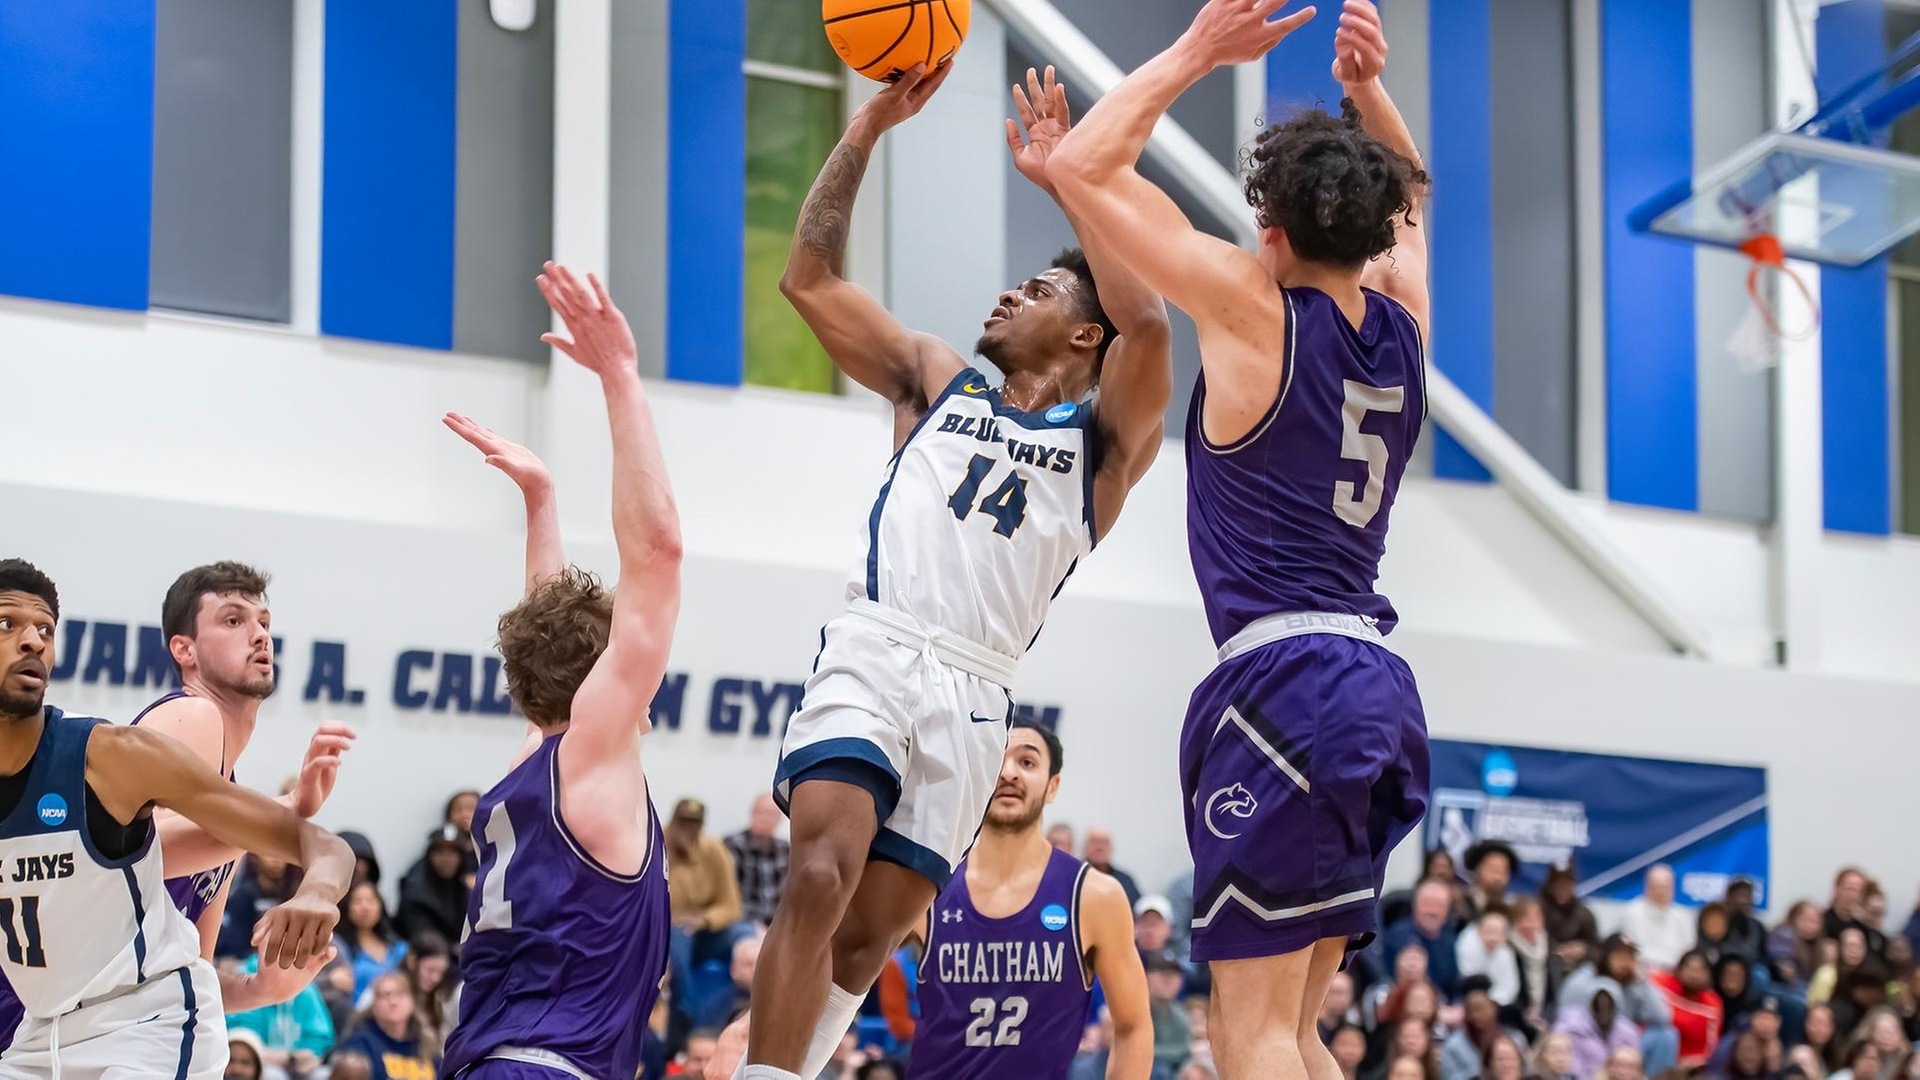 Men's Basketball Takes Down Chatham, 76-53, Advances to NCAA Second Round